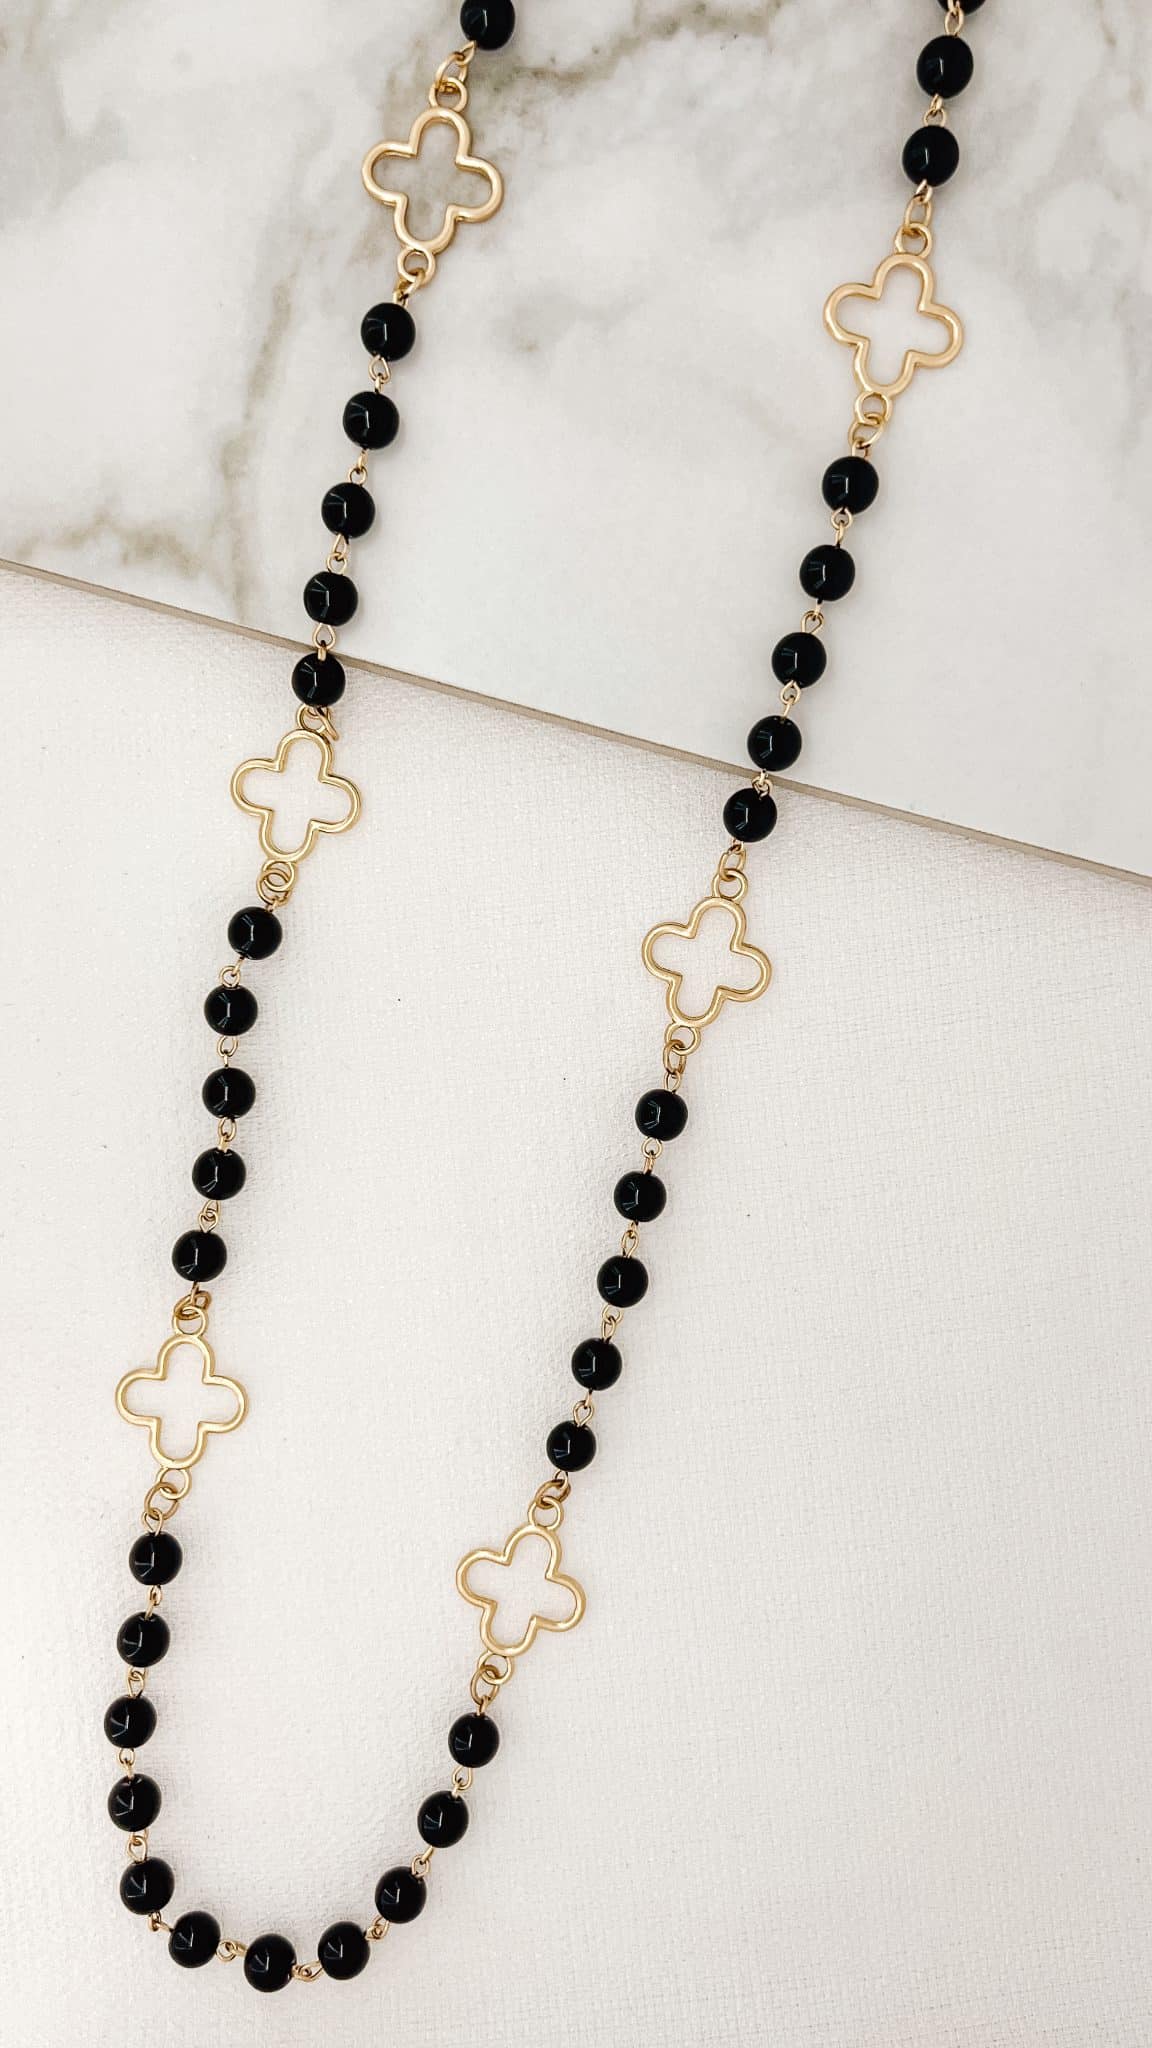 Envy Long Gold And Black Pearl Necklace With Fleur Design